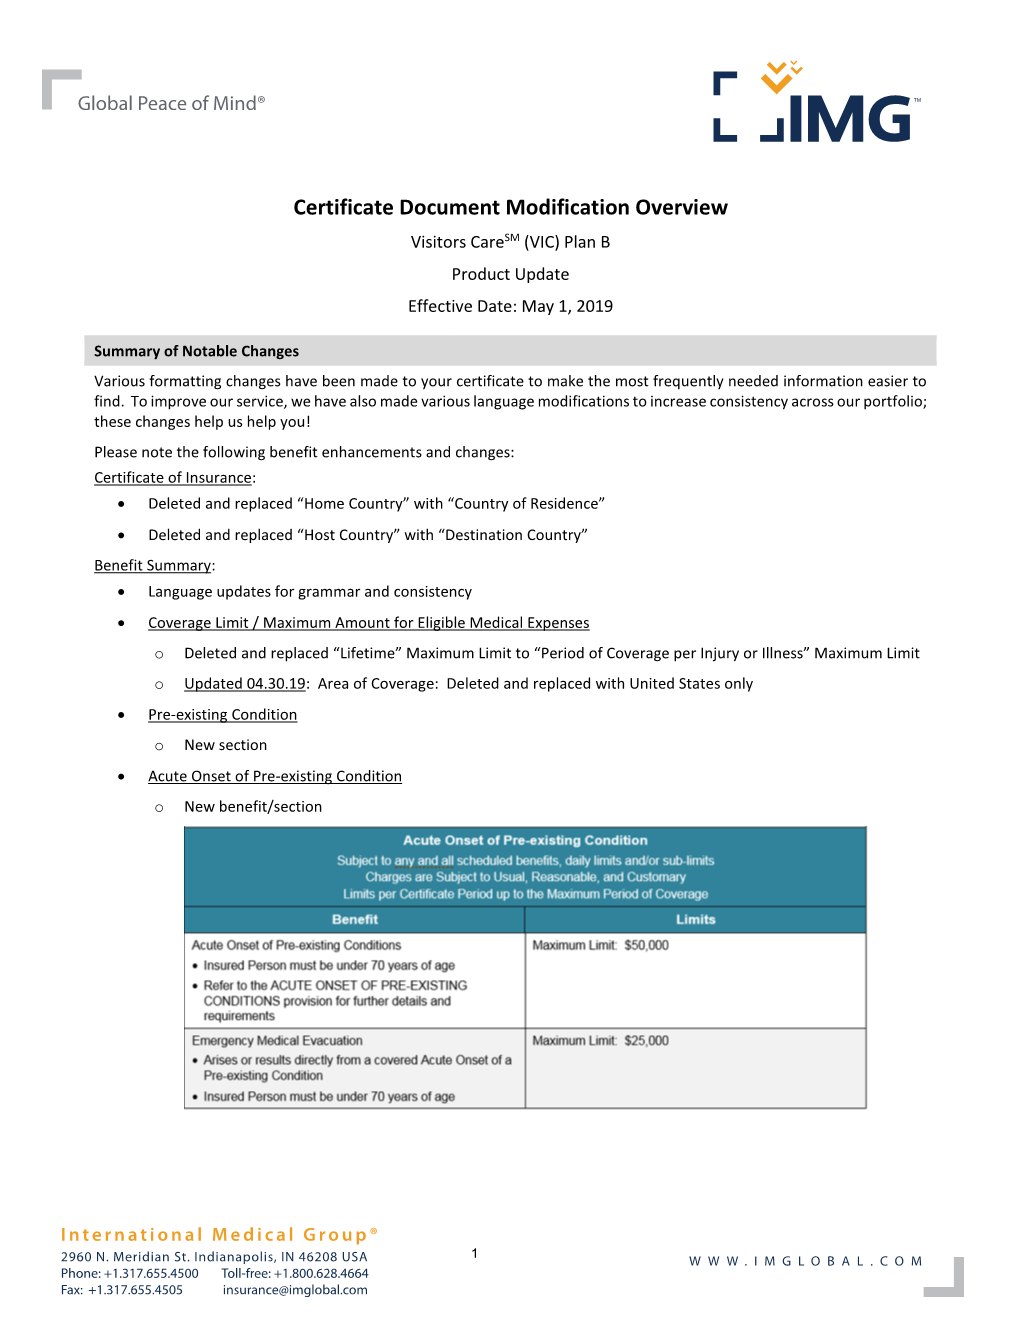 Certificate Document Modification Overview Visitors Caresm (VIC) Plan B Product Update Effective Date: May 1, 2019